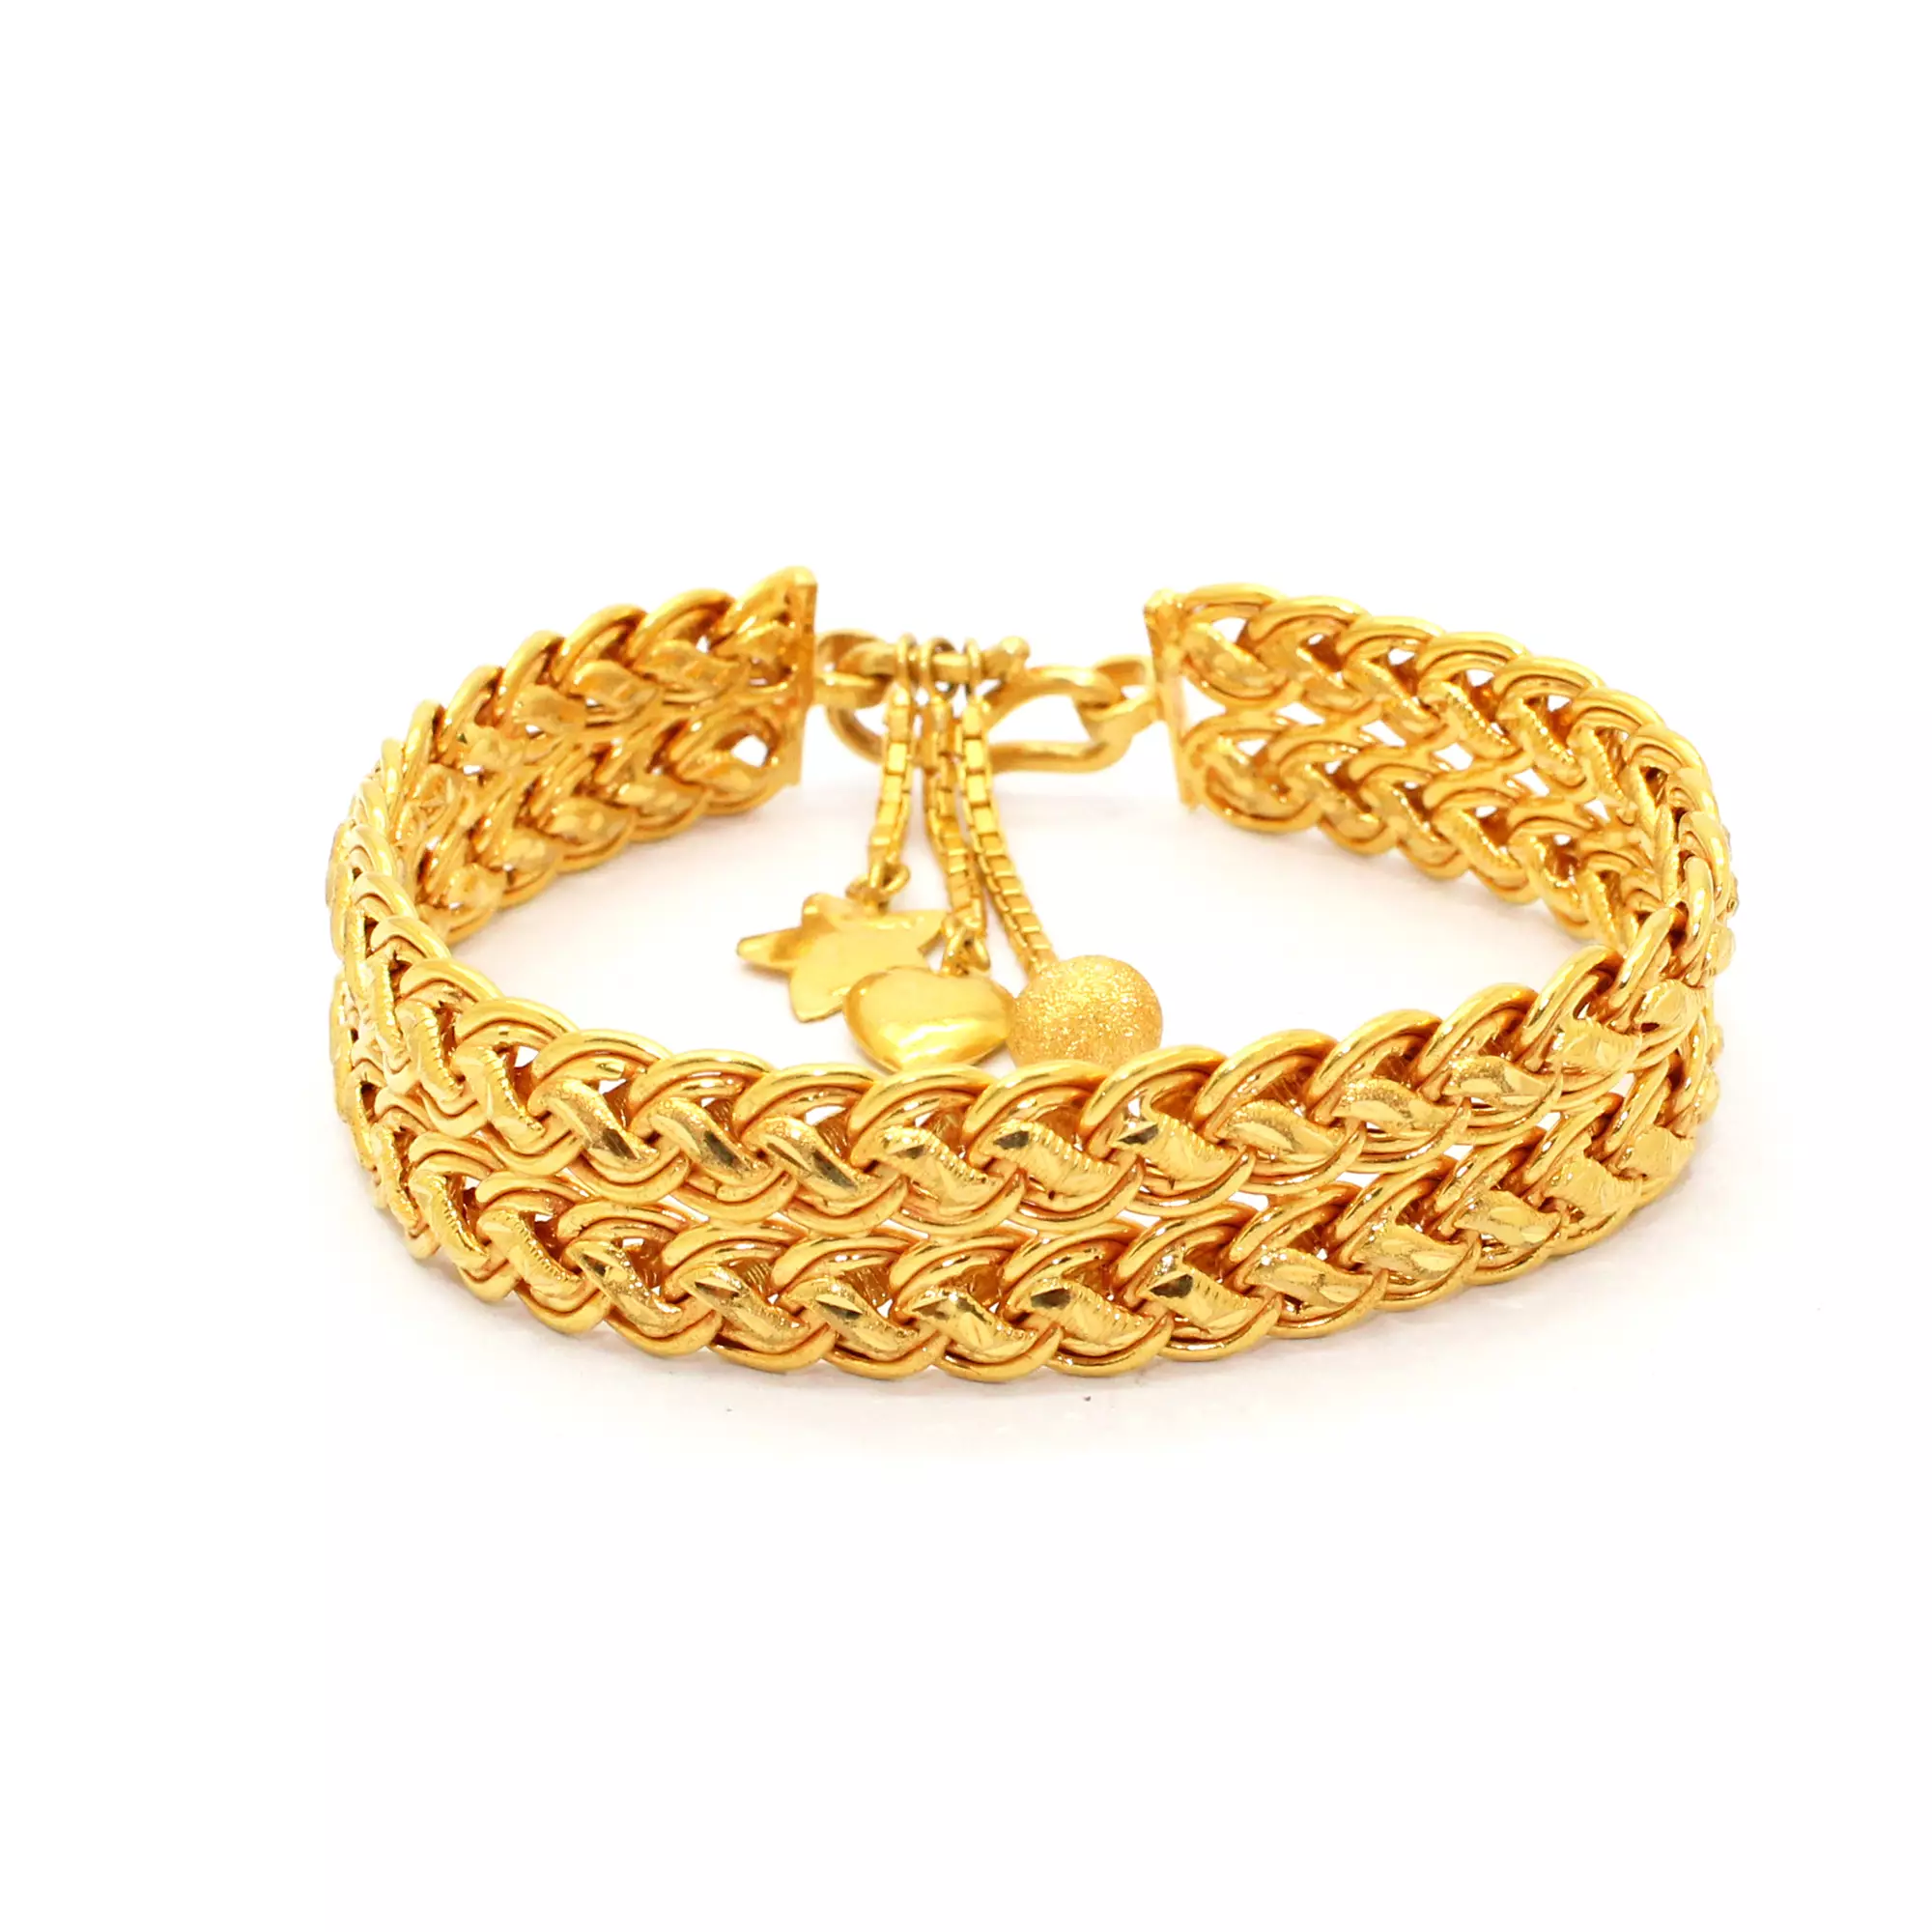 22k Gold Bracelet For Ladies Studded With Precious Stones GBNG 003